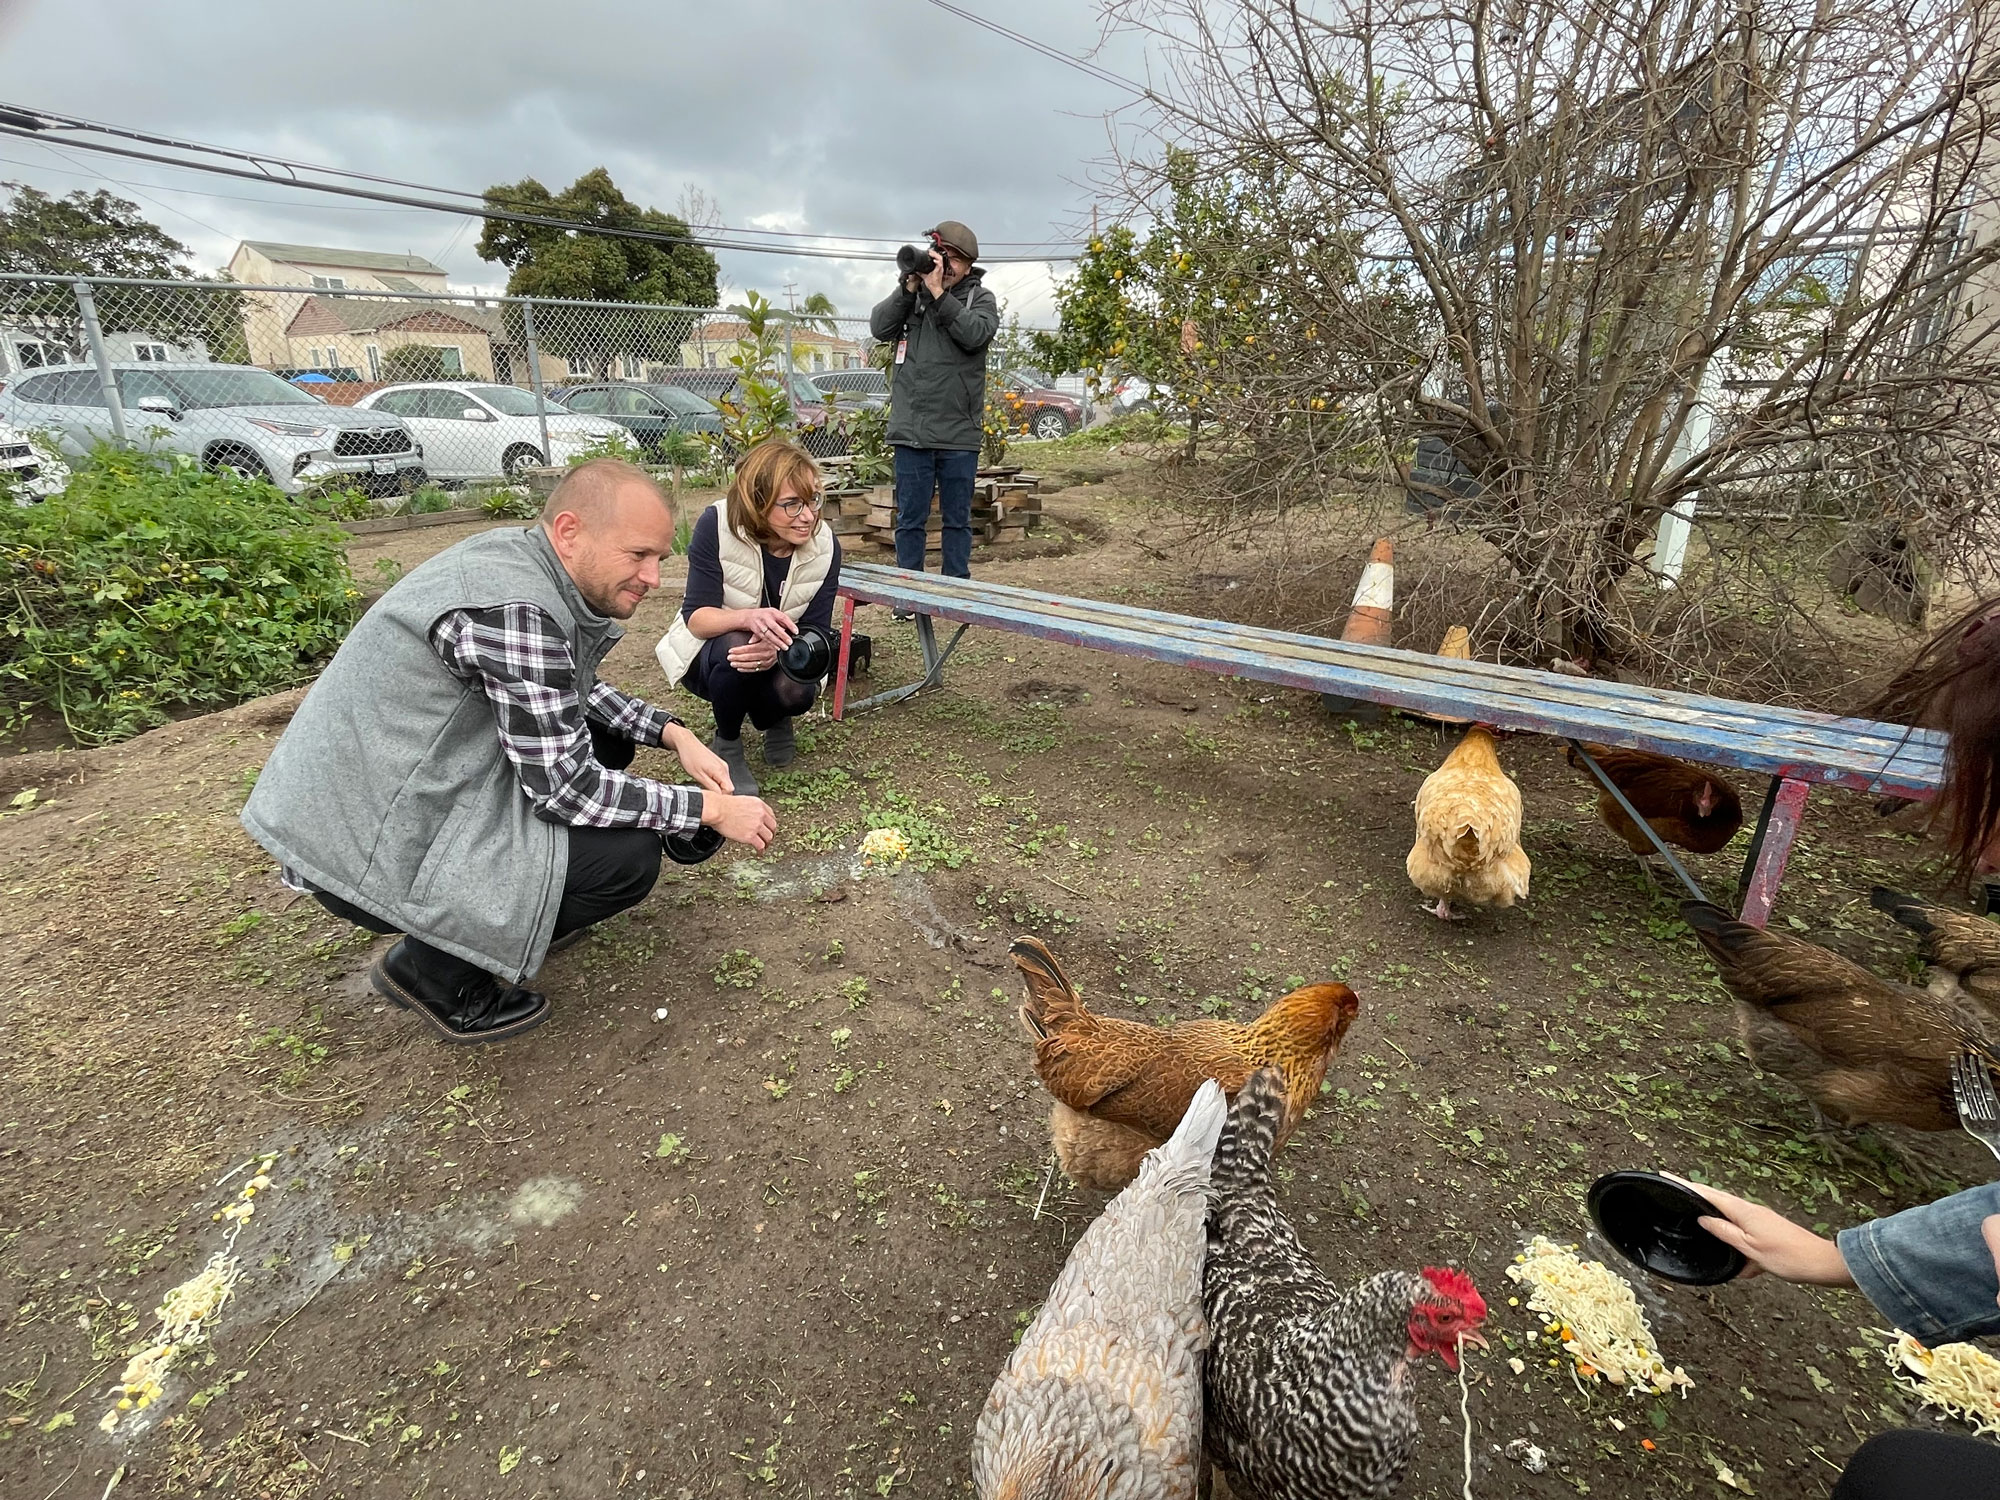 Administrator Cindy Long feeding hens while touring the school garden Chula Vista Middle School